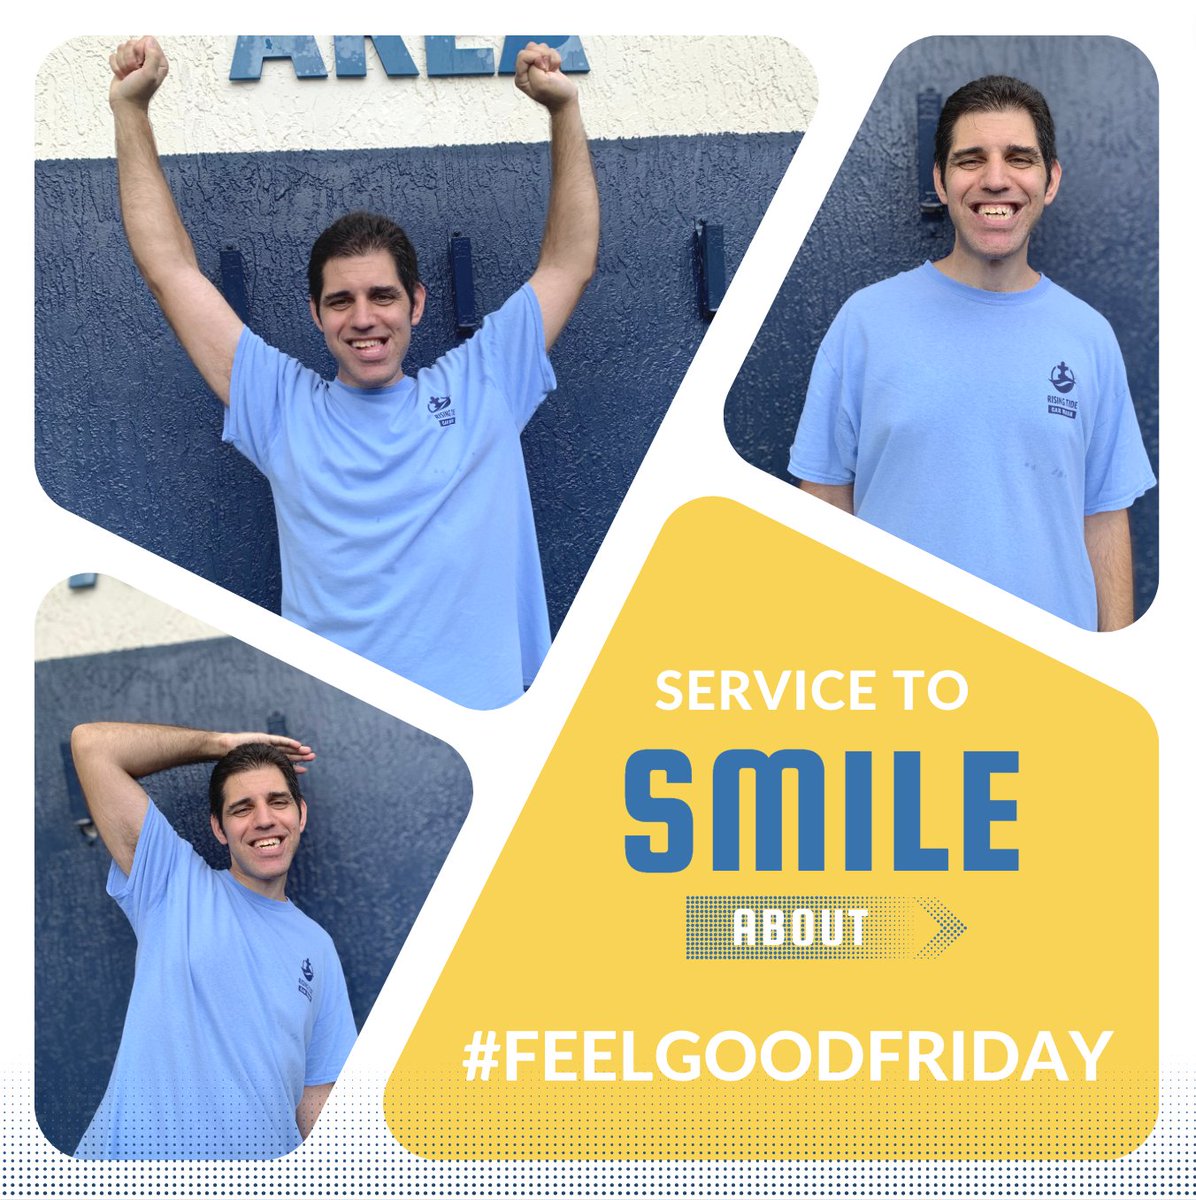 Another wonderful shift underway 🤩 What made you smile today? #feelgoodfriday #autismemployment #supportlocal